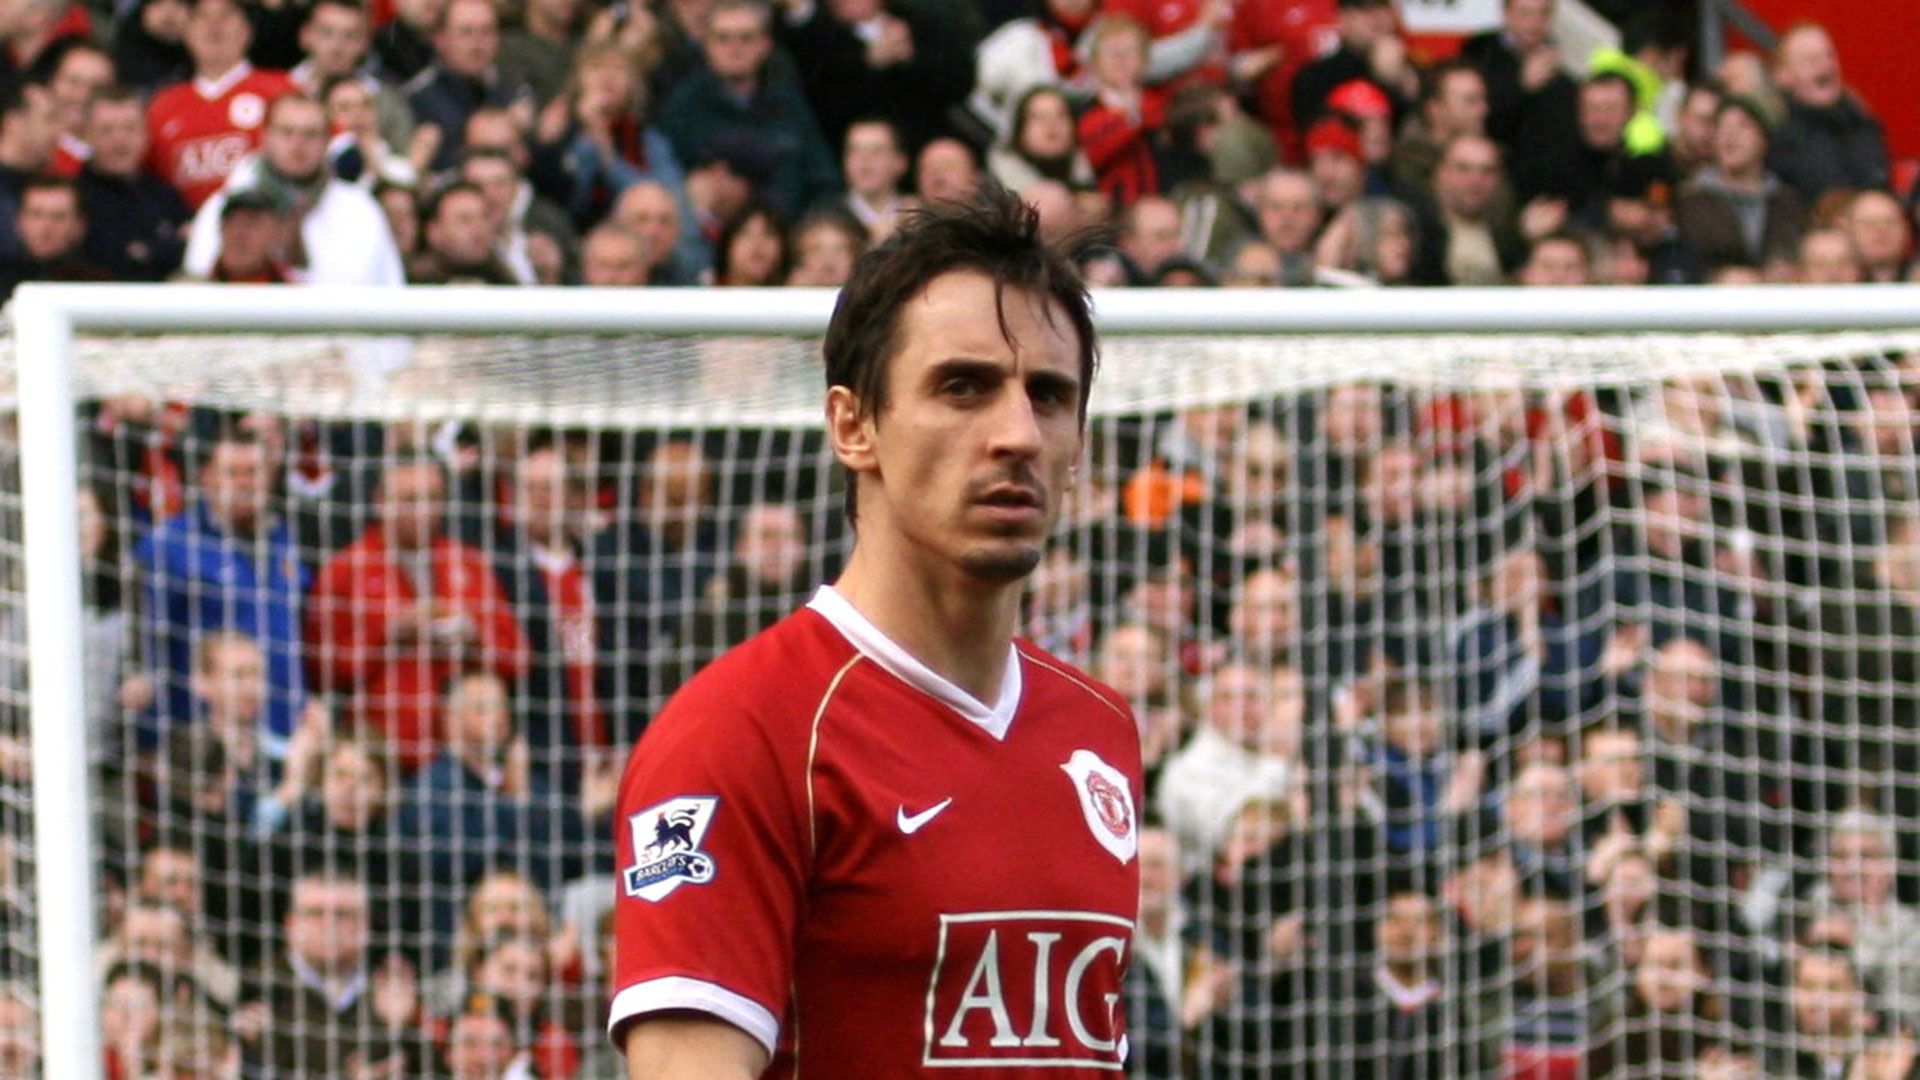 Gary Neville interview: From Red Devil to Green Warrior. The Big Issue